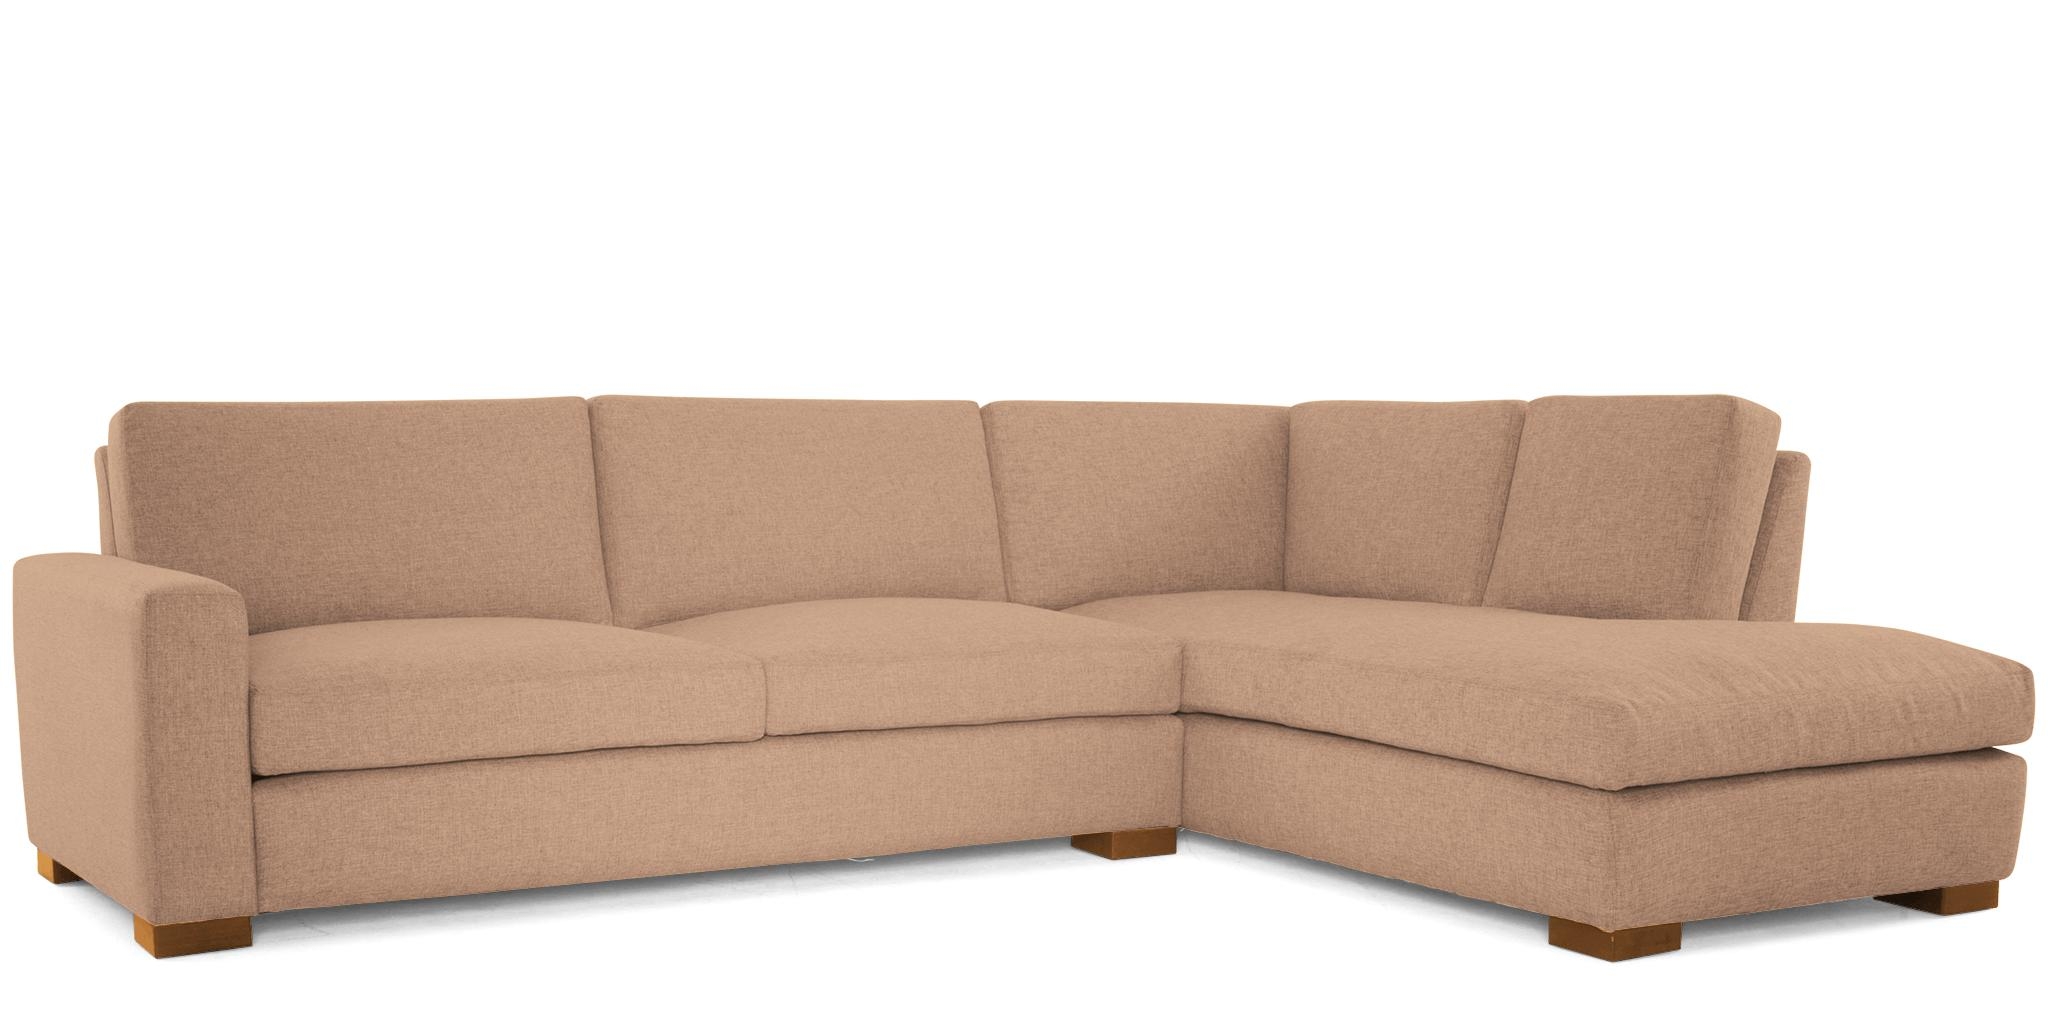 Pink Anton Mid Century Modern Sectional with Bumper - Royale Blush - Mocha - Right  - Image 1